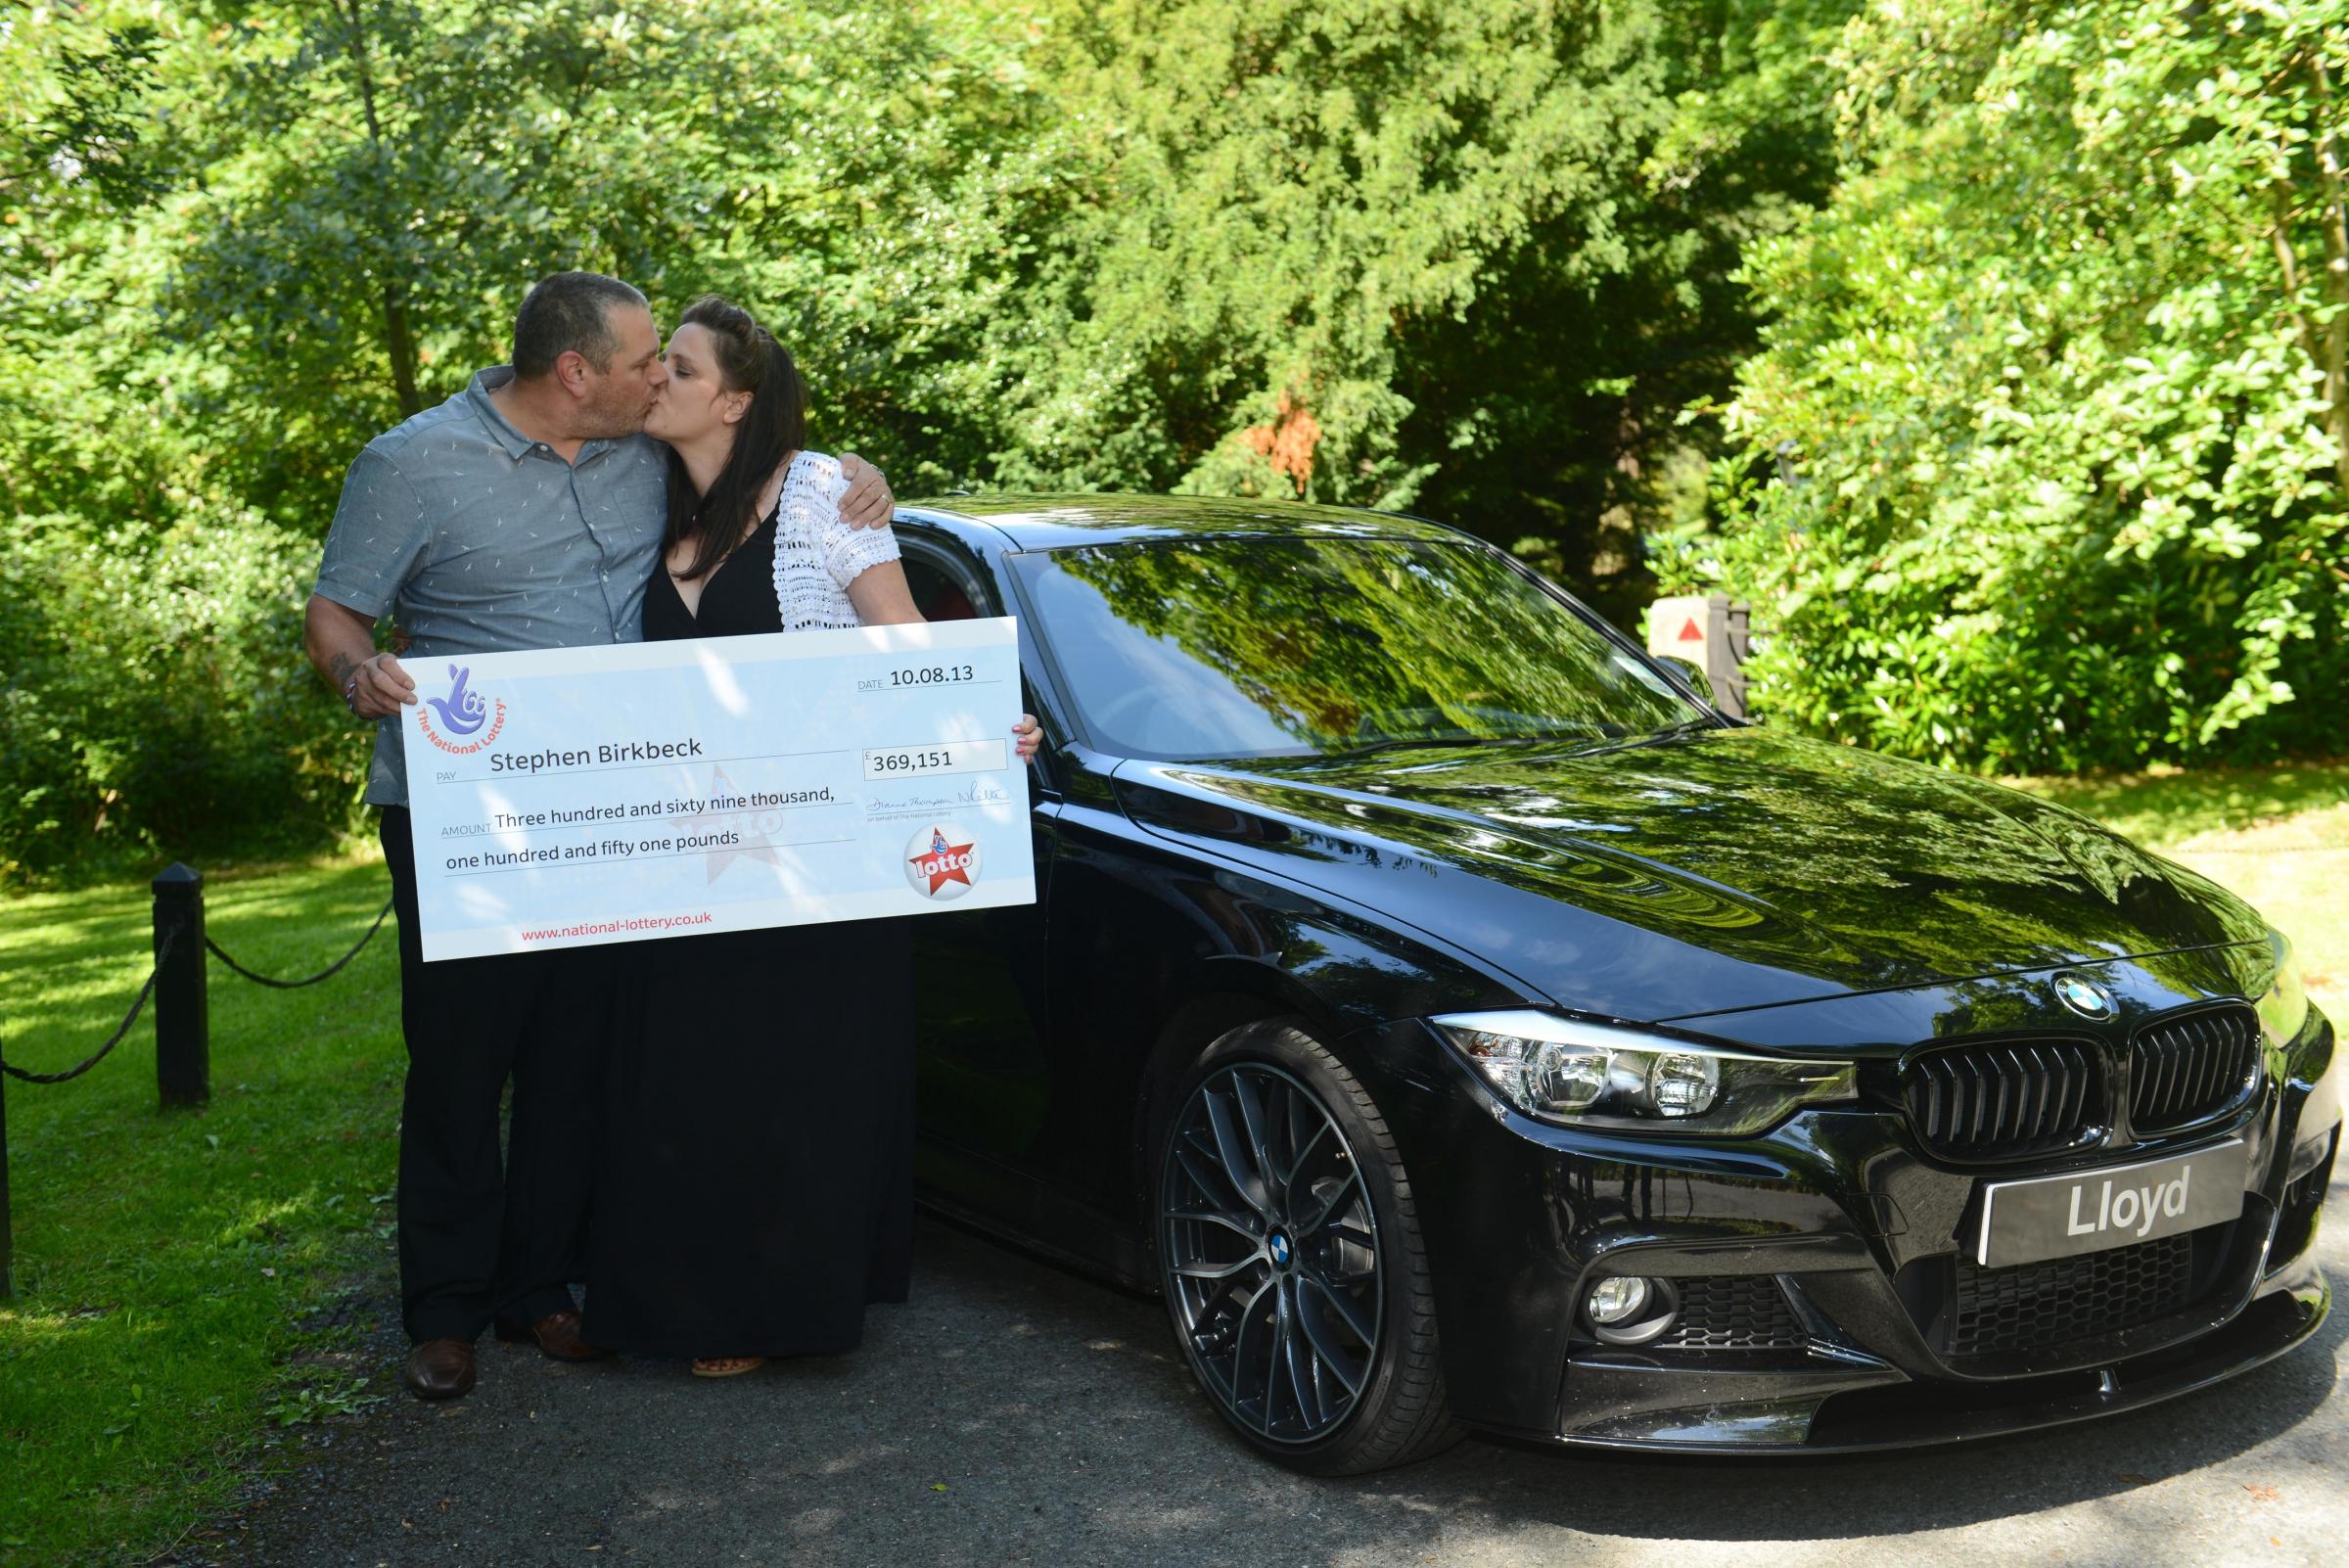 Stephen and Tracy Birkbeck from Penrith, Cumbria, toast their £369,151 Lotto win at Ullswater in the Lake District. The lucky couple put their fortune down to a scarab beetle they had recently purchased on a holiday to Egypt. Their numbers came up